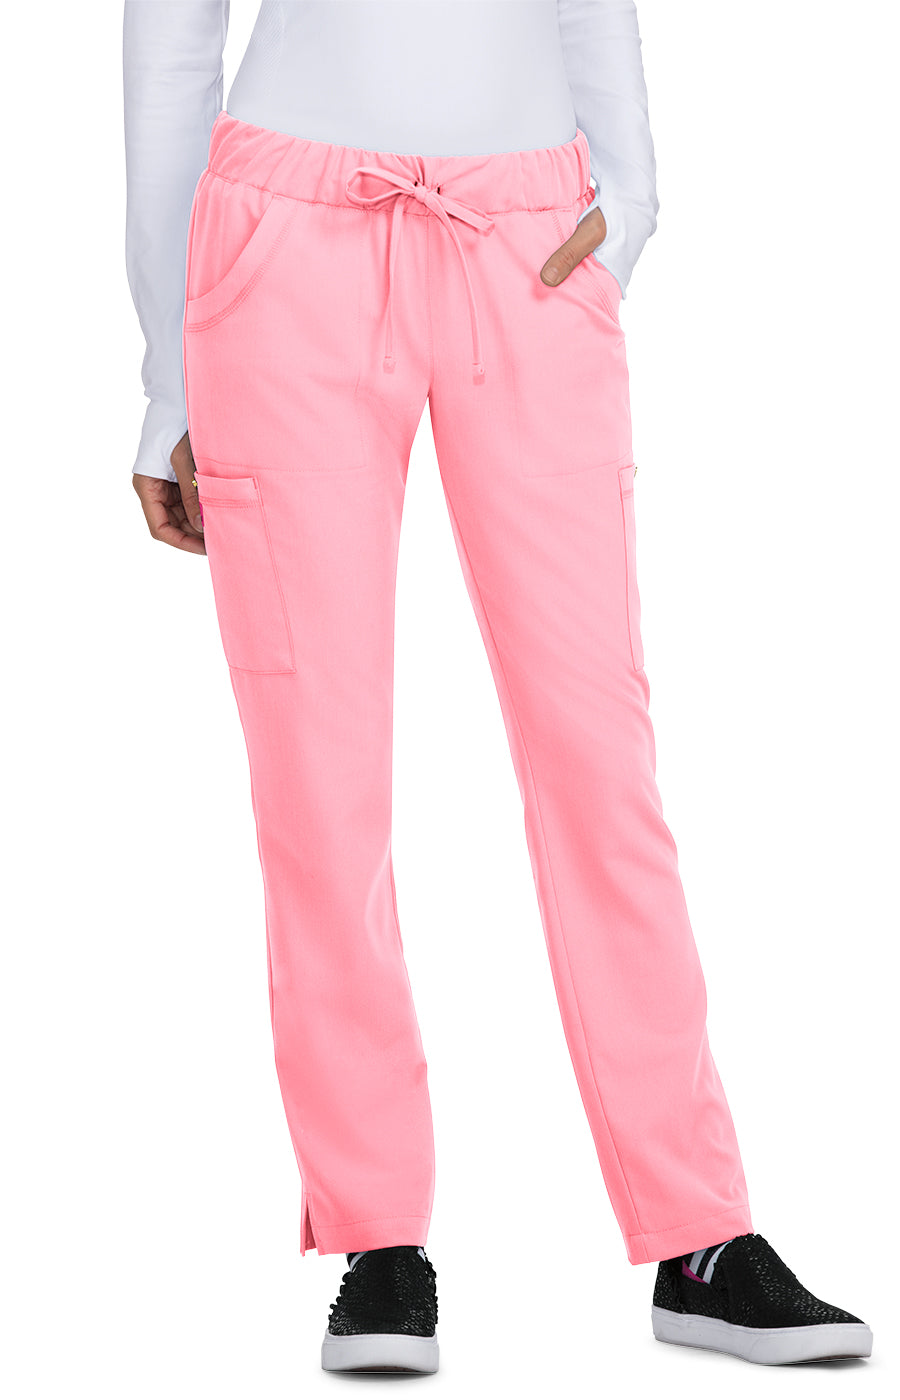 Buttercup Pant Sweet Pink